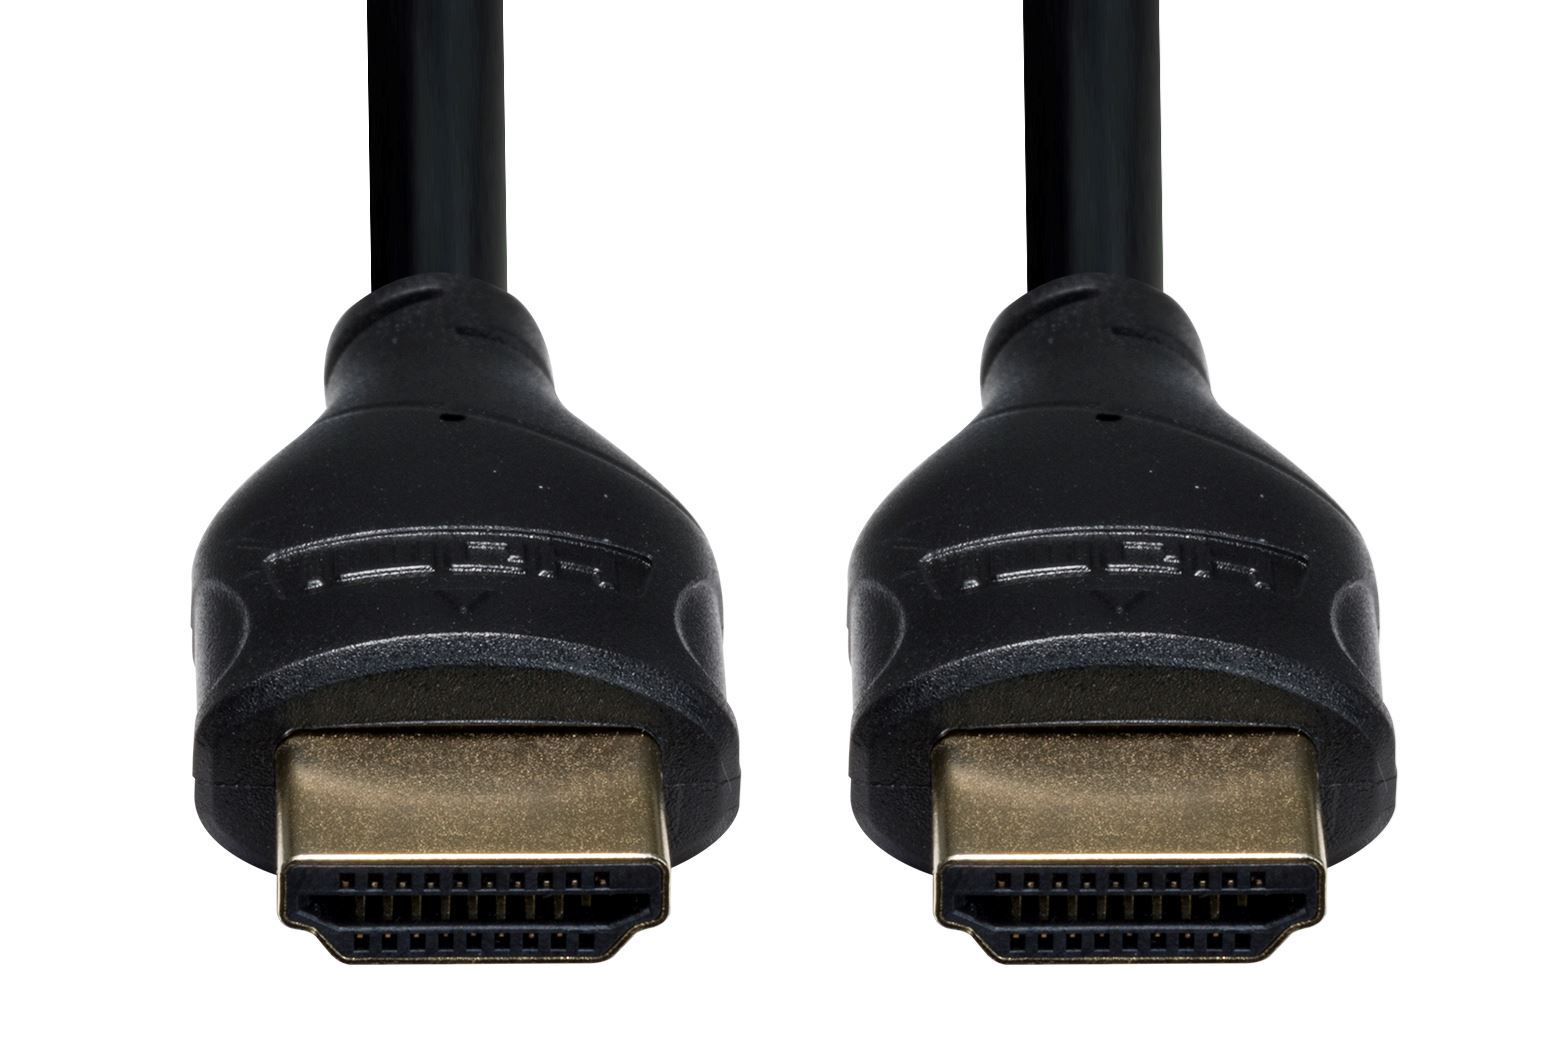 DYNAMIX_1.5m_HDMI_10Gbs_Slimline_High-Speed_Cable_with_Ethernet._Max_Res:_4K2K@24/30Hz_(3840x2160)_8_Audio_channels._8bit_colour_depth._Supports_CEC,_3D,_ARC,_Ethernet. 872